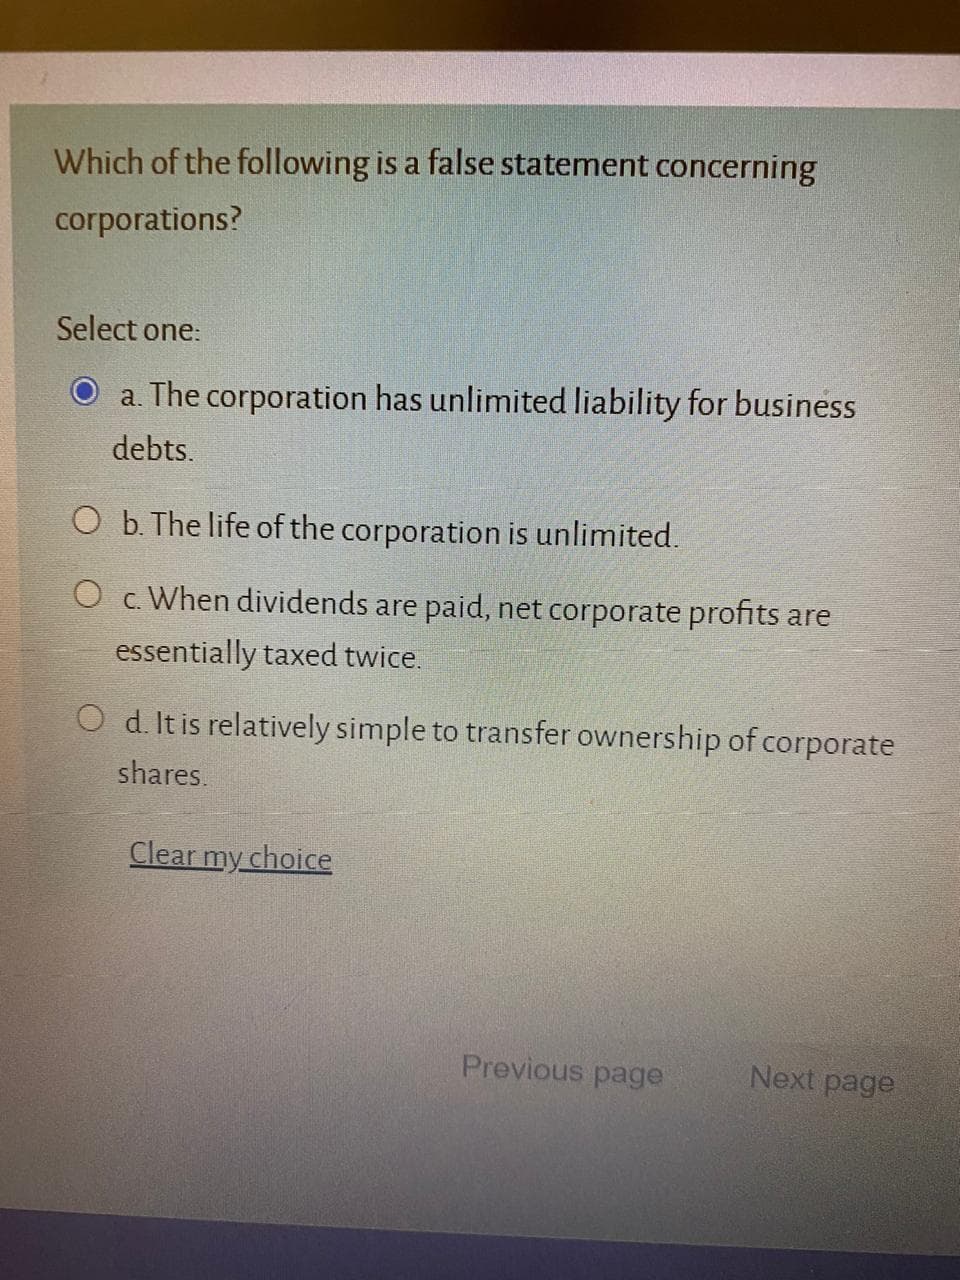 Which of the following is a false statement concerning
corporations?
Select one:
a. The corporation has unlimited liability for business
debts.
O b. The life of the corporation is unlimited.
O c. When dividends are paid, net corporate profits are
essentially taxed twice.
O d. It is relatively simple to transfer ownership of corporate
shares.
Clear my choice
